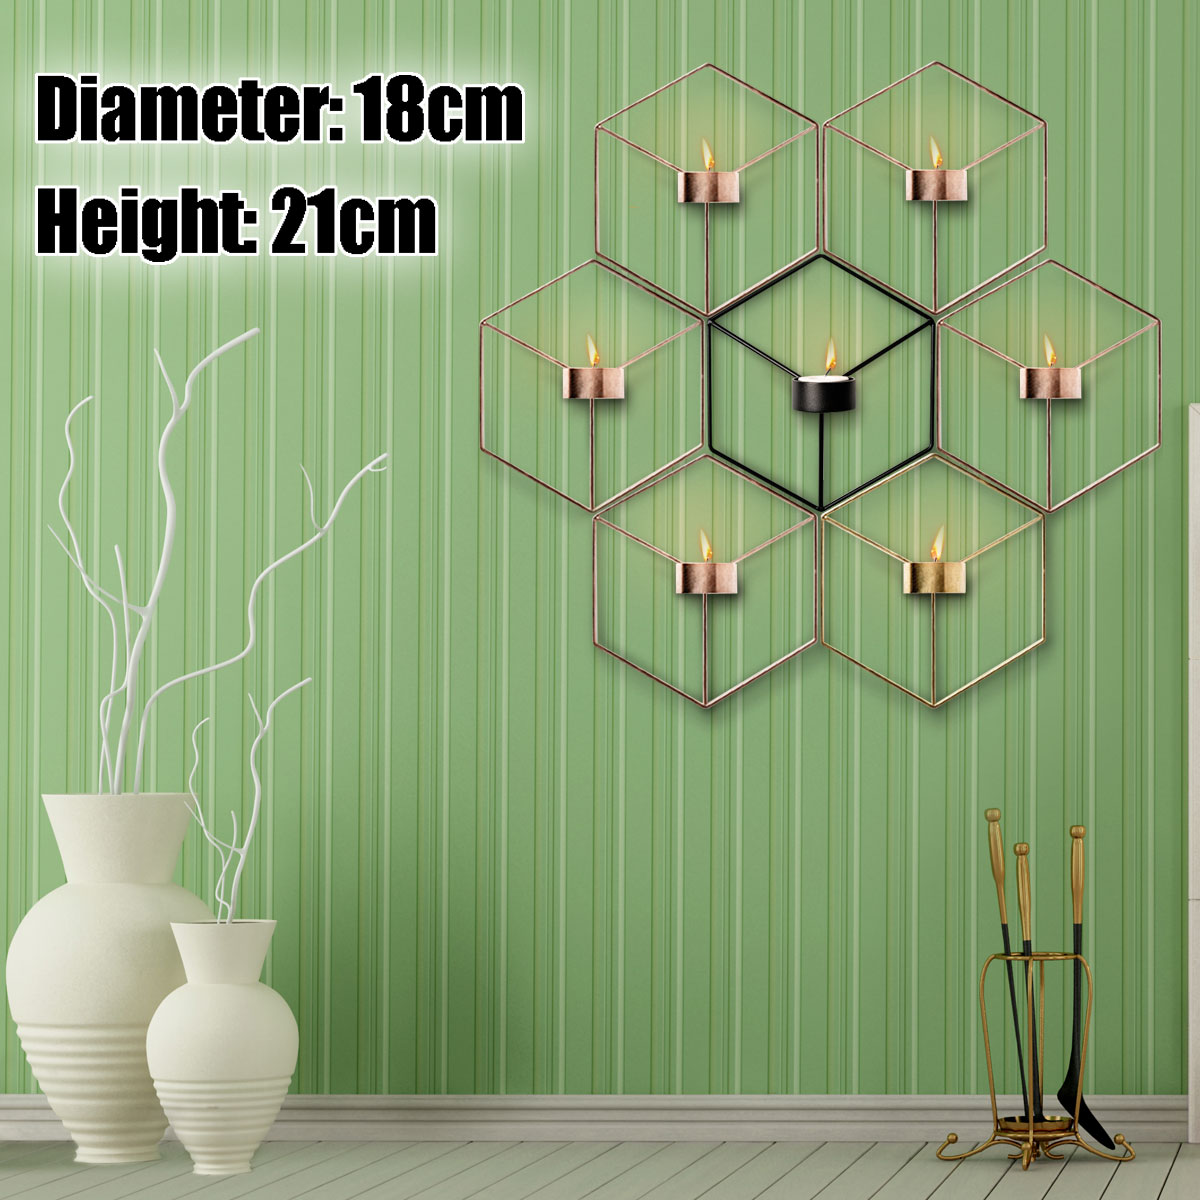 3D-Geometric-Nordic-Style-Candle-Holder-Iron-Candlestick-Handmade-Wall-Art-Room-Home-Decor-1390551-1